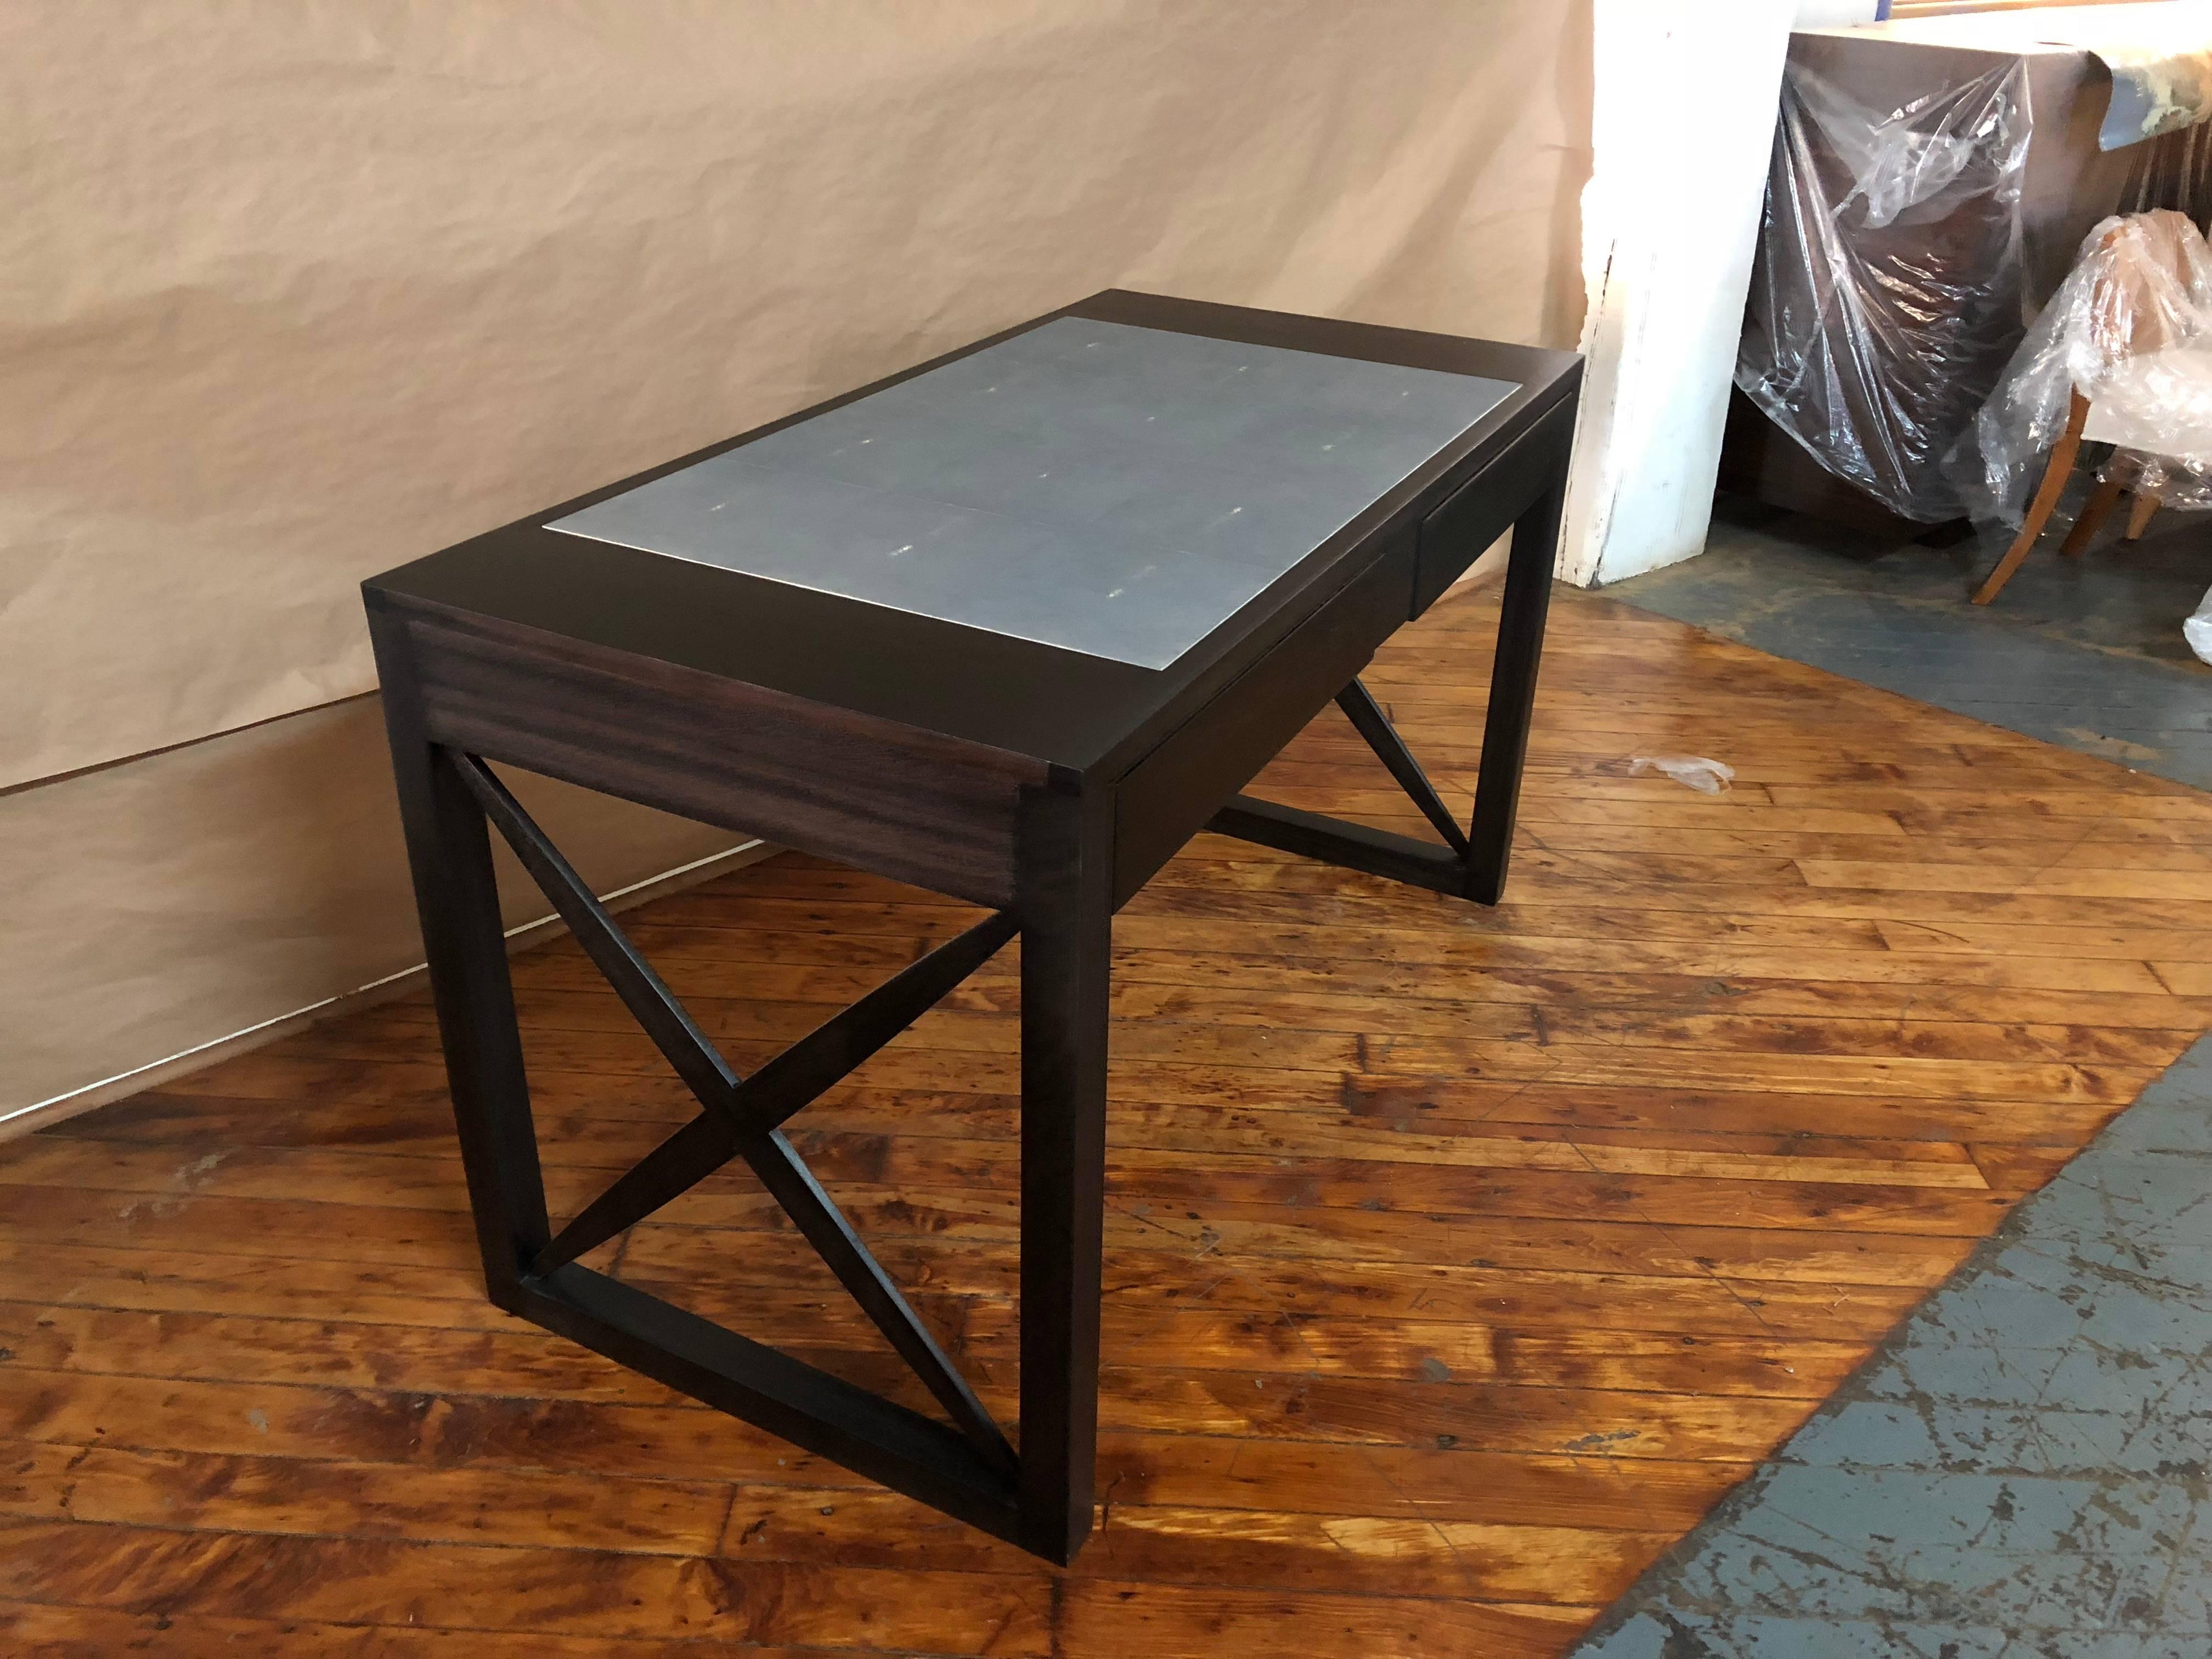 Shagreen top and mahogany ebonized desk

Customization is available upon request, customers can choose from a variety of:
Size
Wood
Finishes
Colors
Leather.